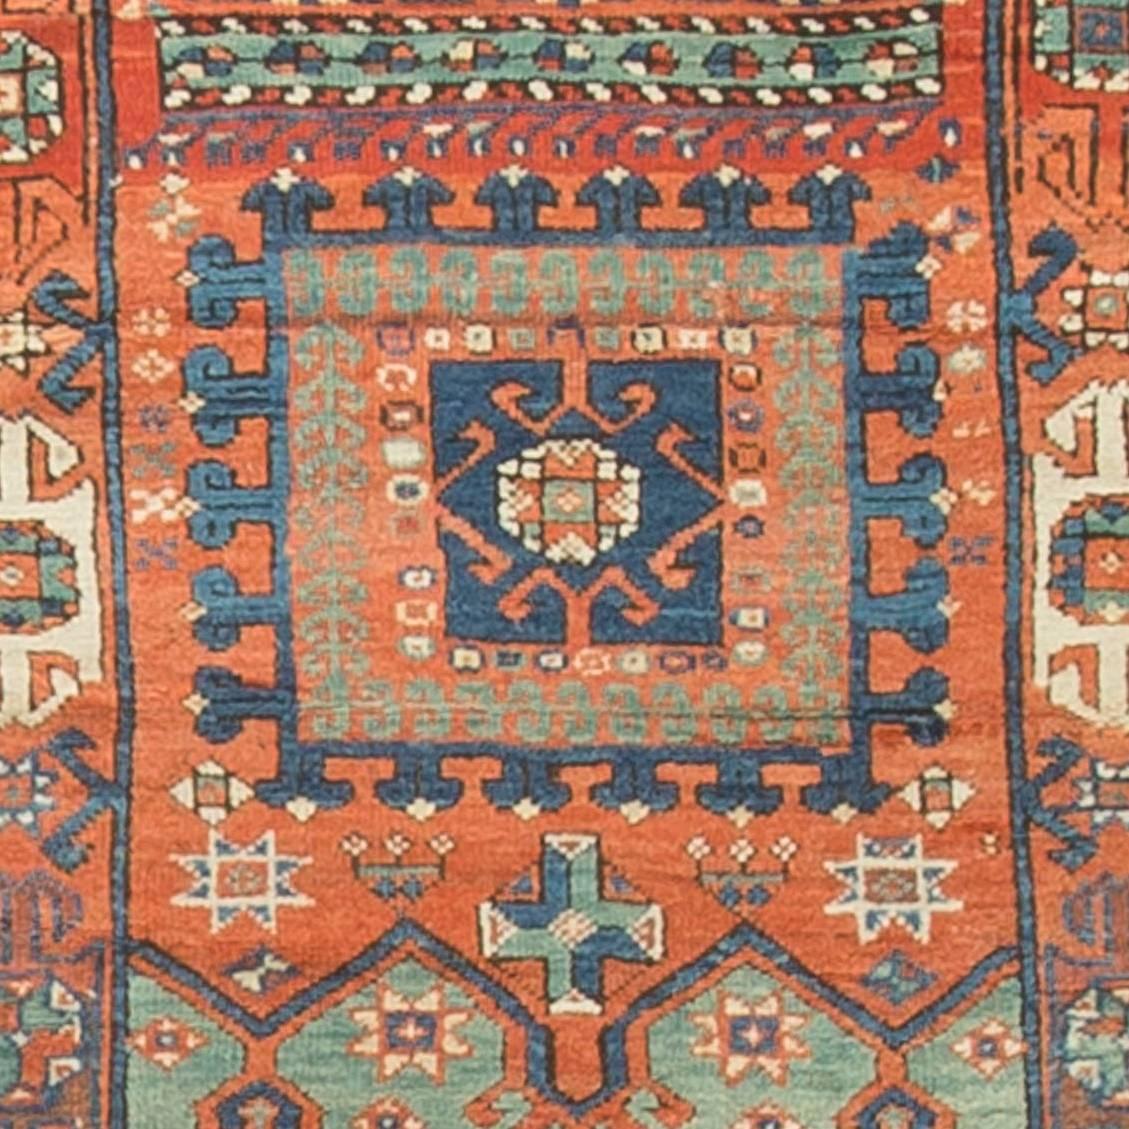 A Bergama antique Turkish rug reflecting a Caucasian style. Rug weaving in the Bergama region can be dated back to the 11th century. Size: 4' x 5'7
 